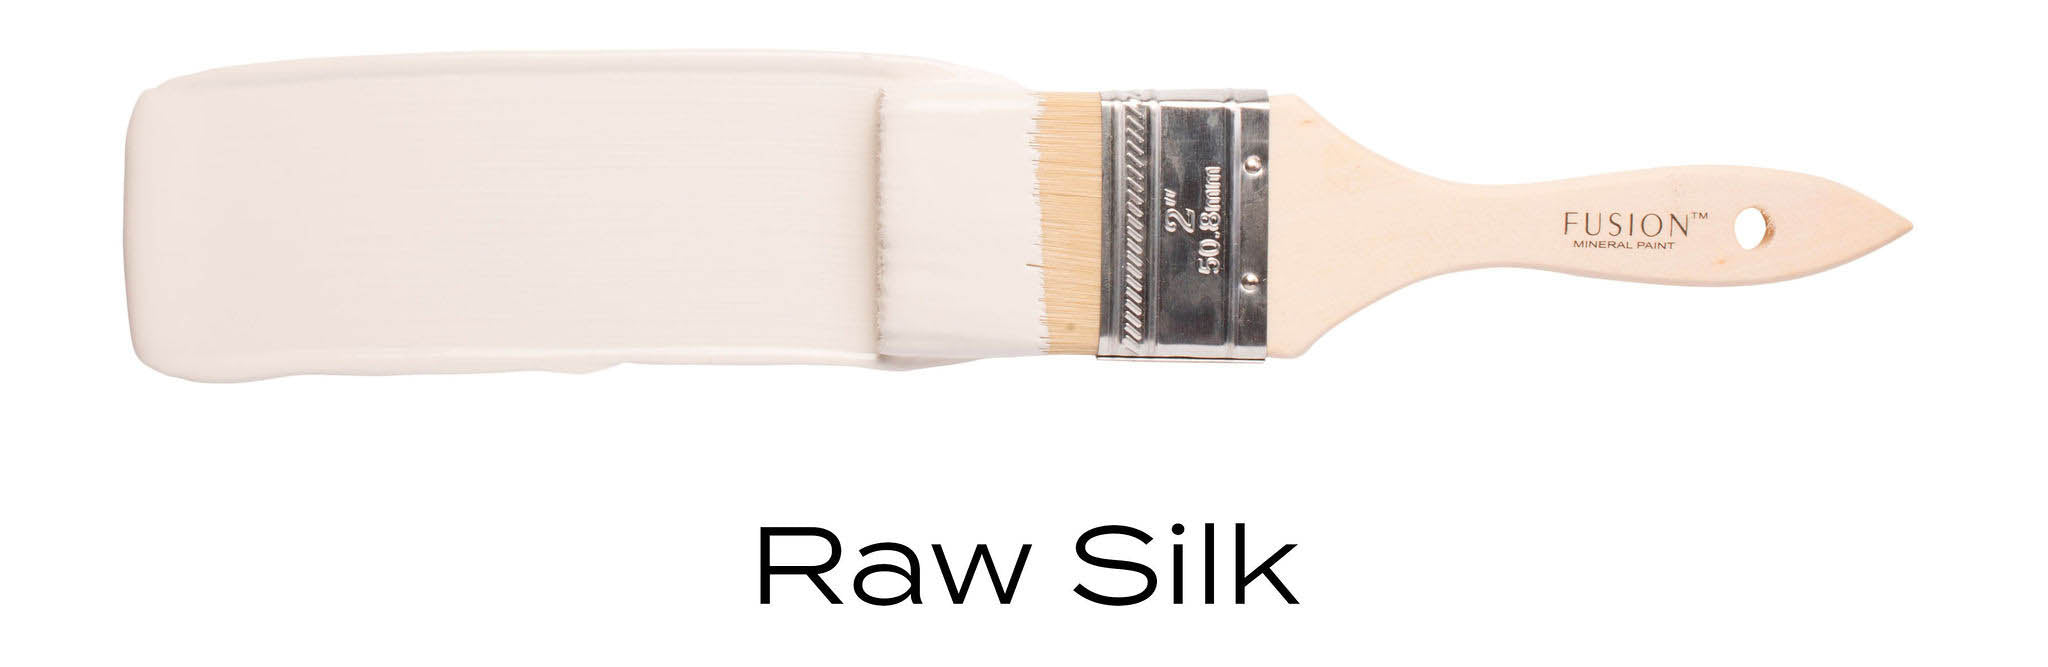 Raw Silk Fusion Mineral Paint Furniture Paint Colour Example, No Prep or top coat needed, UK Stockist